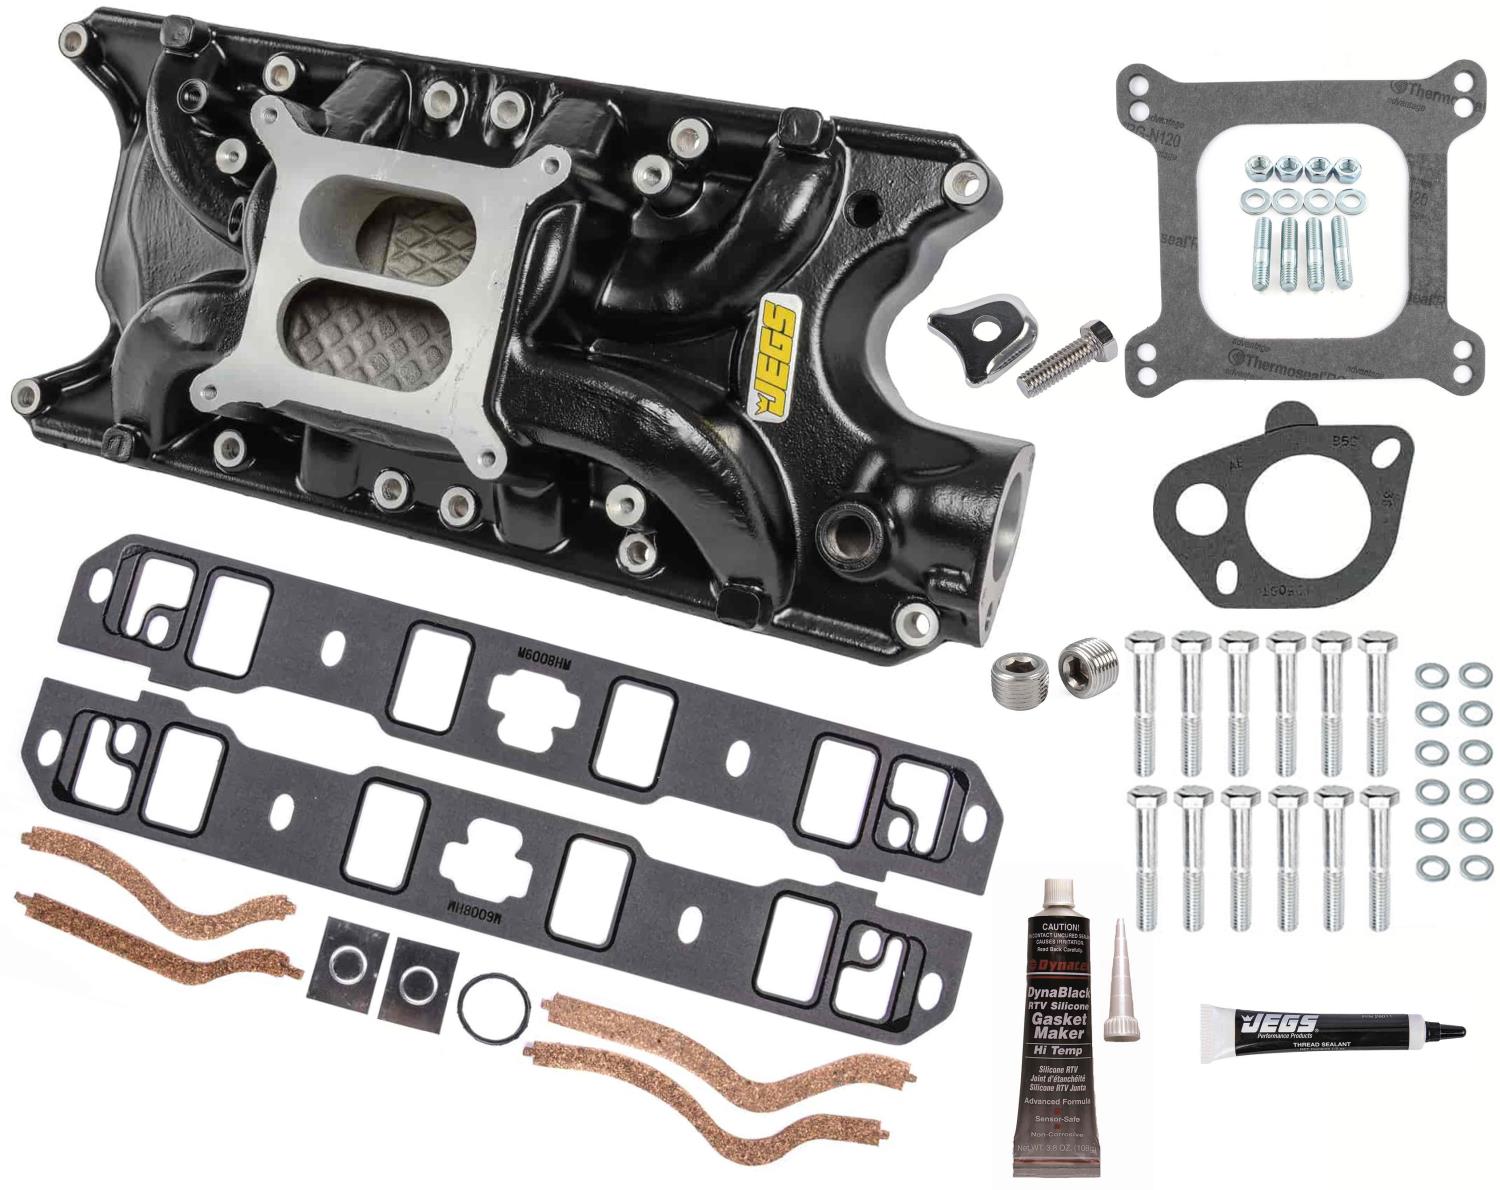 Intake Manifold Kit for 1962-1985 Small Block Ford 260, 289 & 302 (Except Boss 302), Dual Plane 4-BBL [Black]